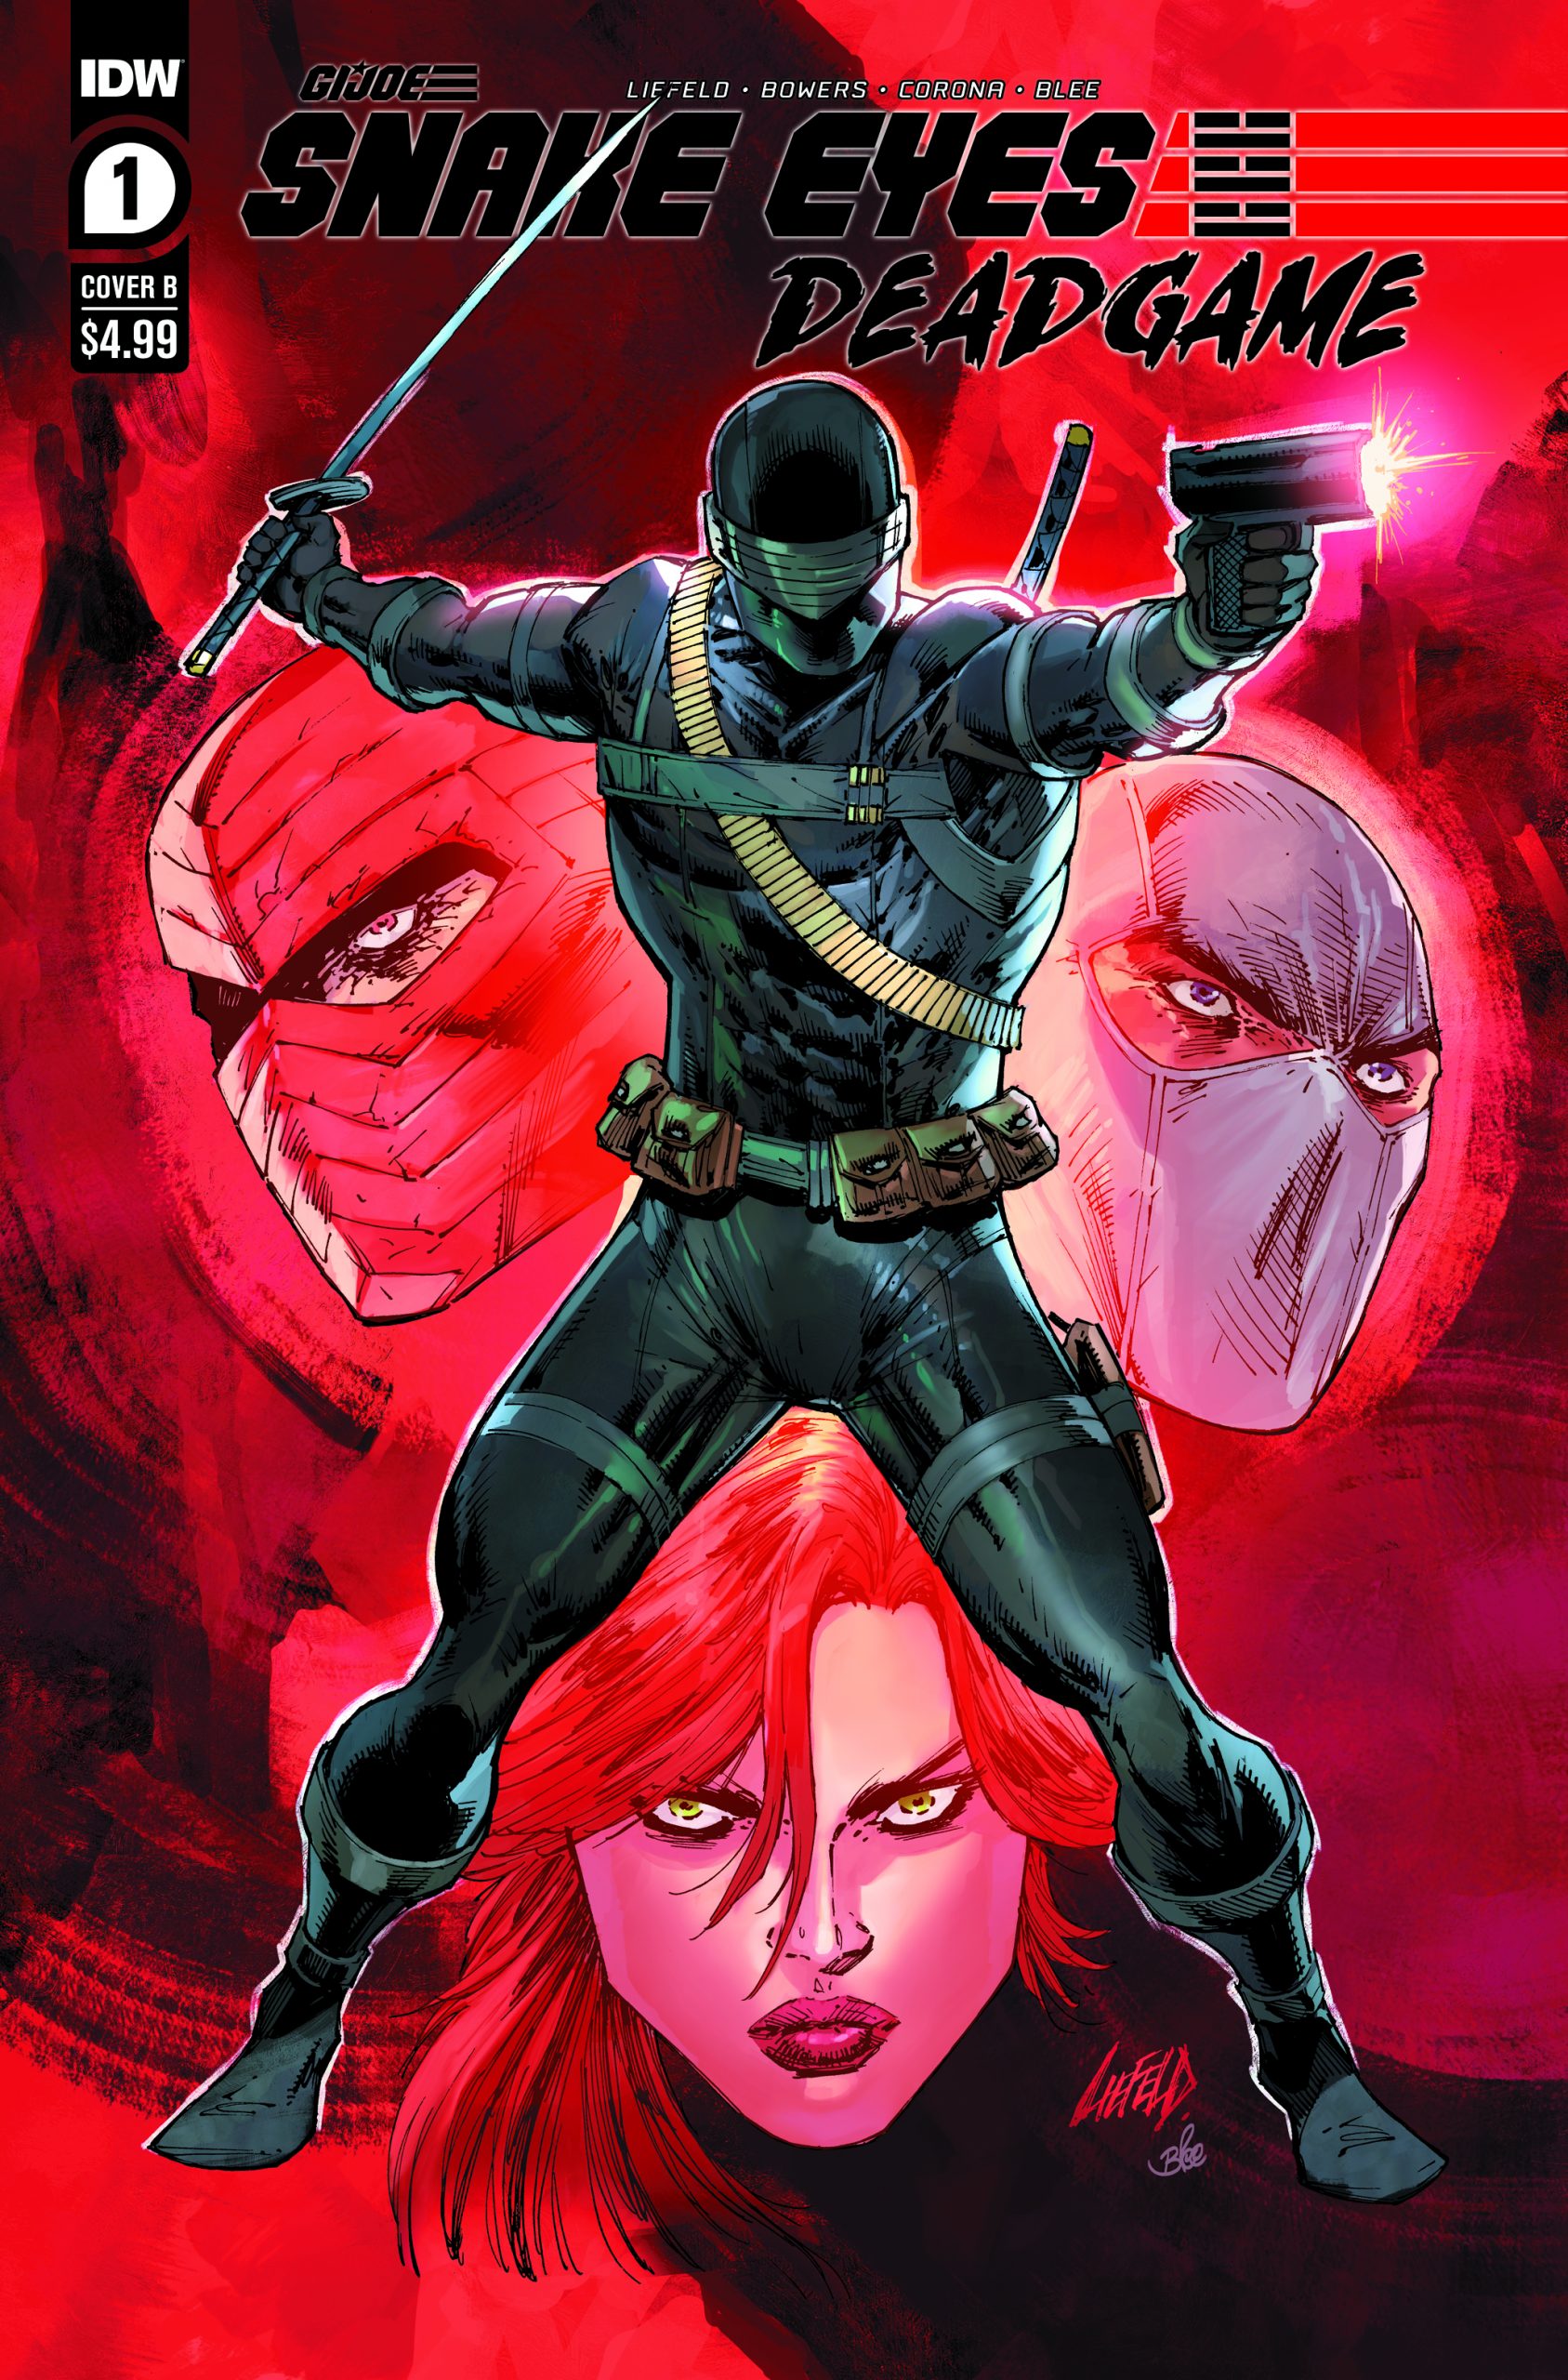 Rob Liefeld's Snakes Eyes Deadgame #1B Cover